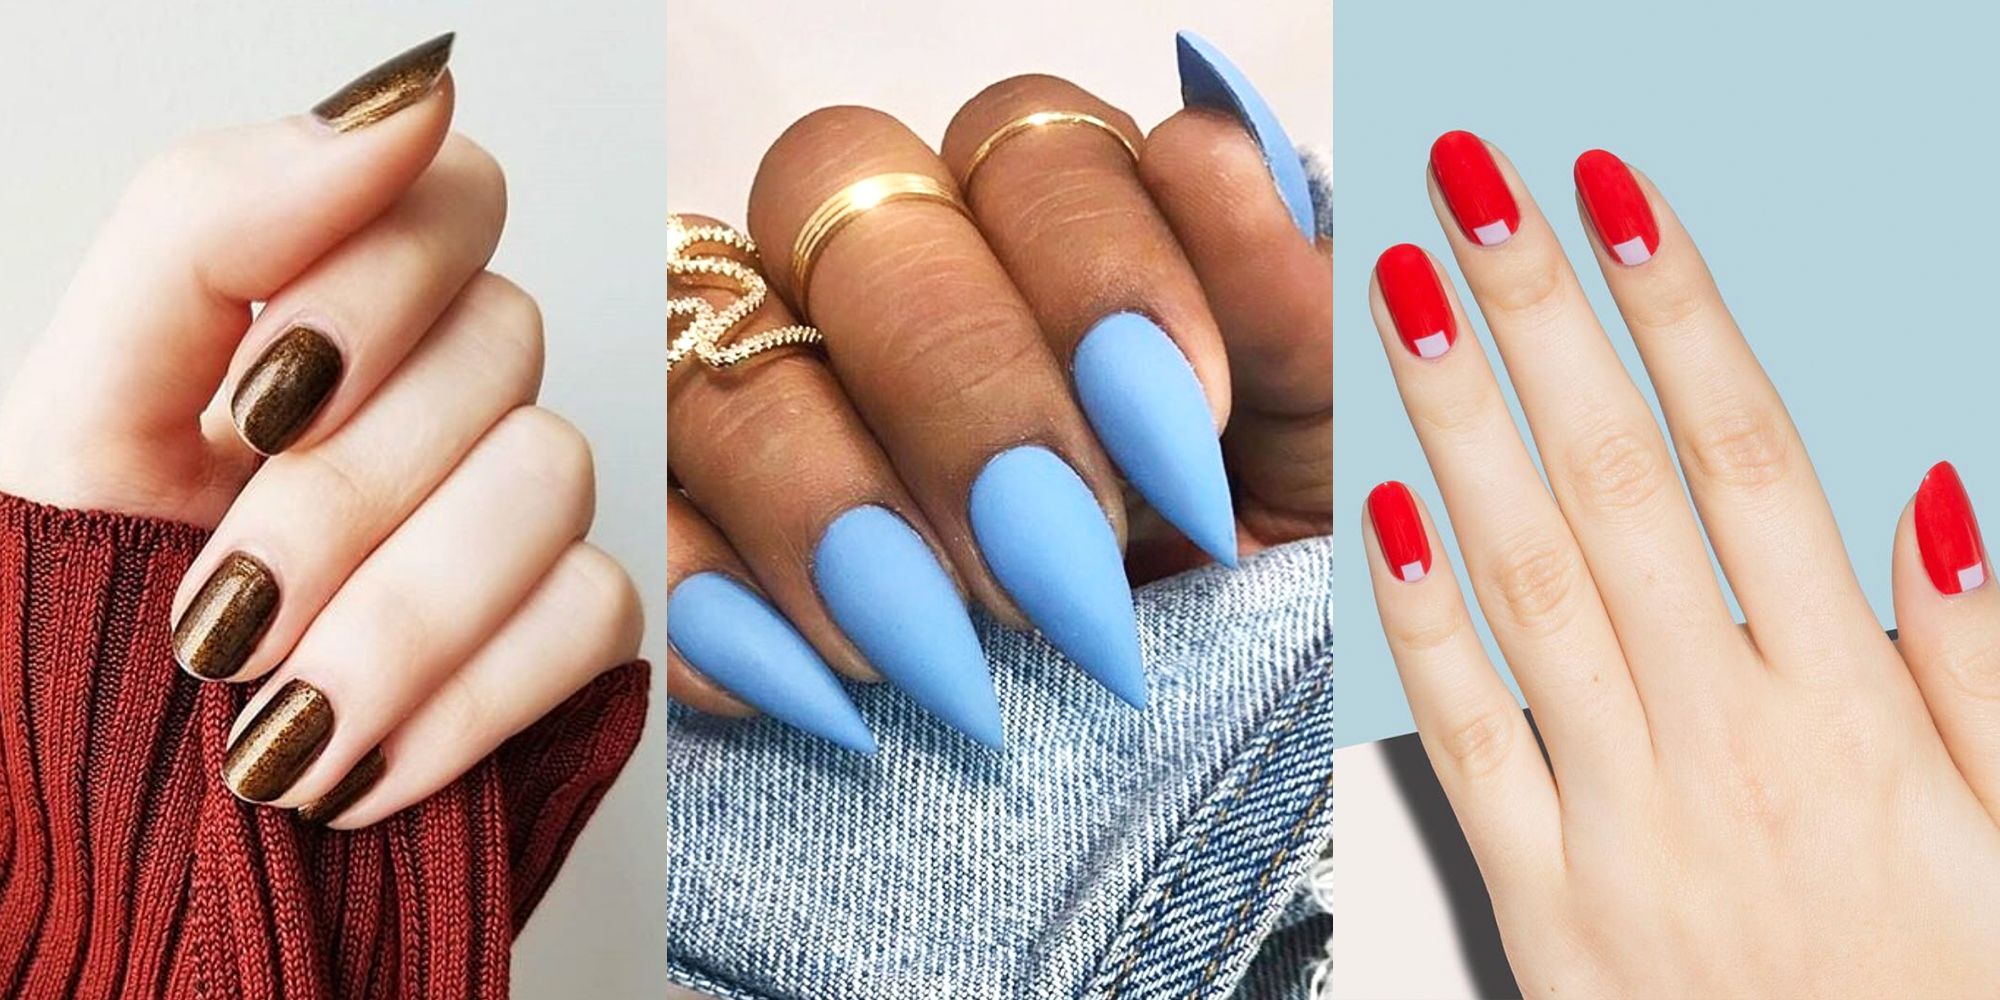 10 Best Nail Shapes Of 2021 What Nail Shape Is Best For Your Hands Press on nail, fake nails with design short size round head full cover acrylic nail tips press on,acrylic nail, glue on nail, nails. 10 best nail shapes of 2021 what nail